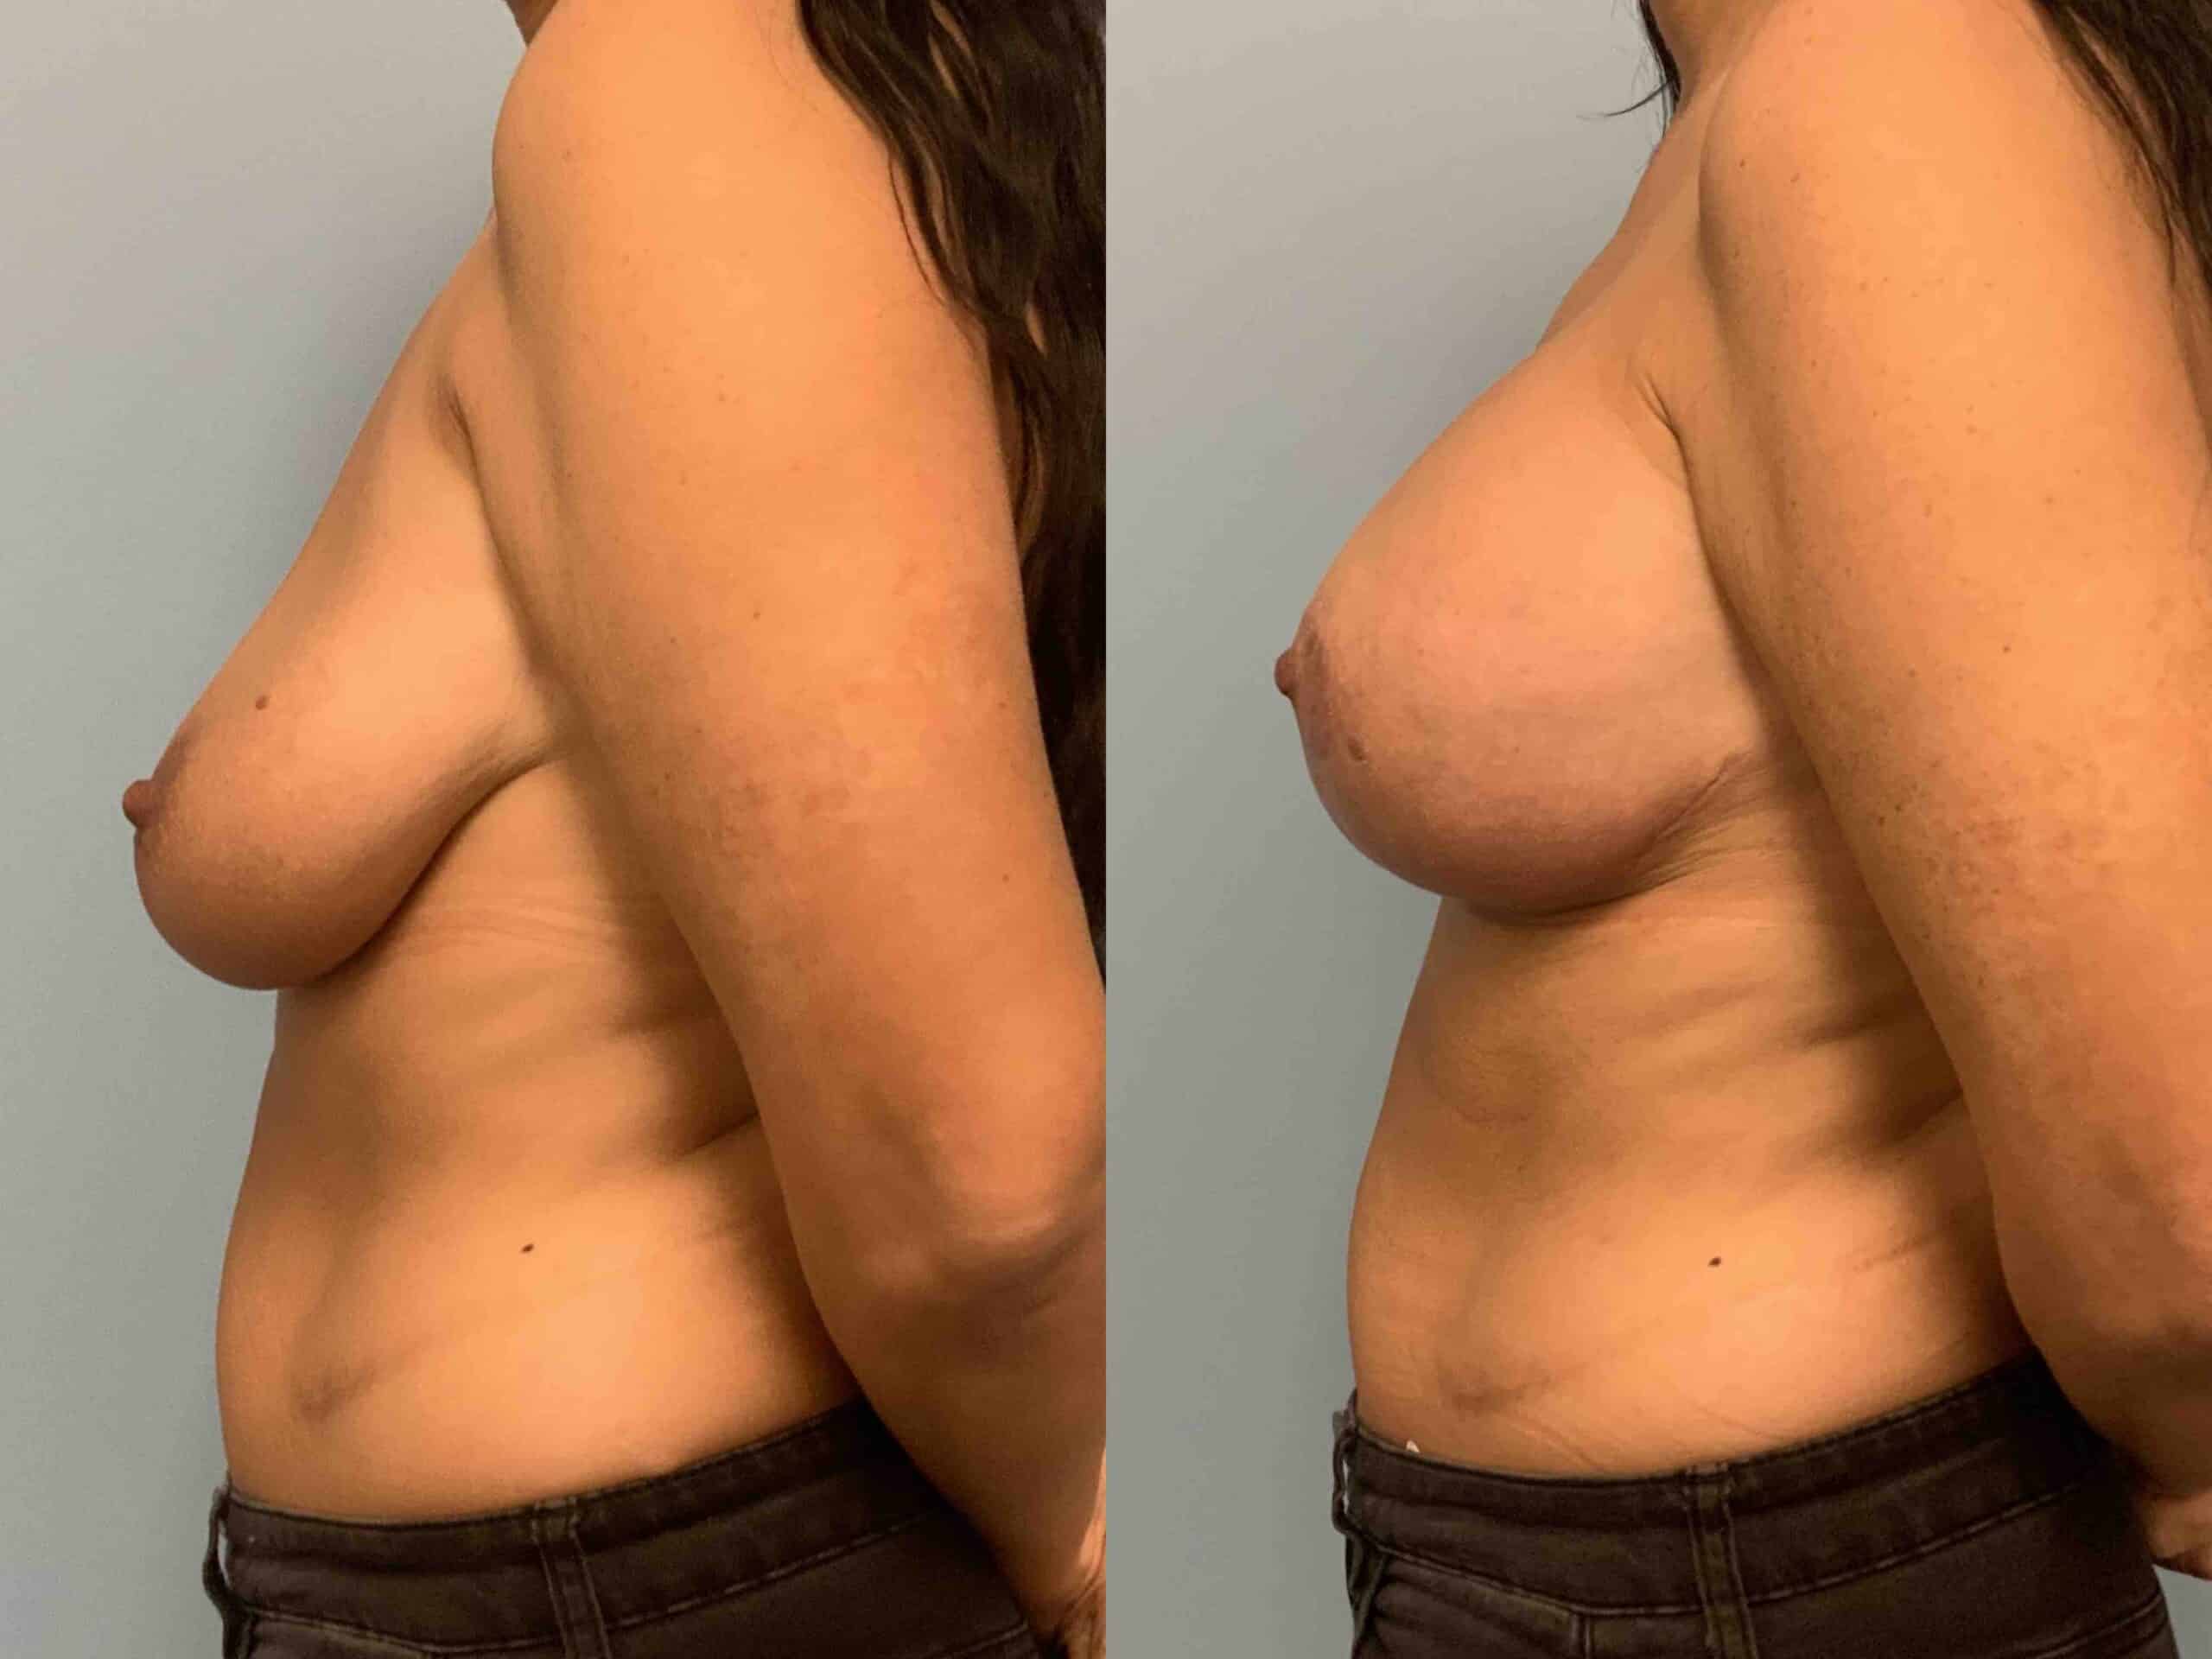 Before and after, 1 mo post op from Breast Lift/Mastopexy, Breast Augmentation, Axillary Roll Resection (side view)